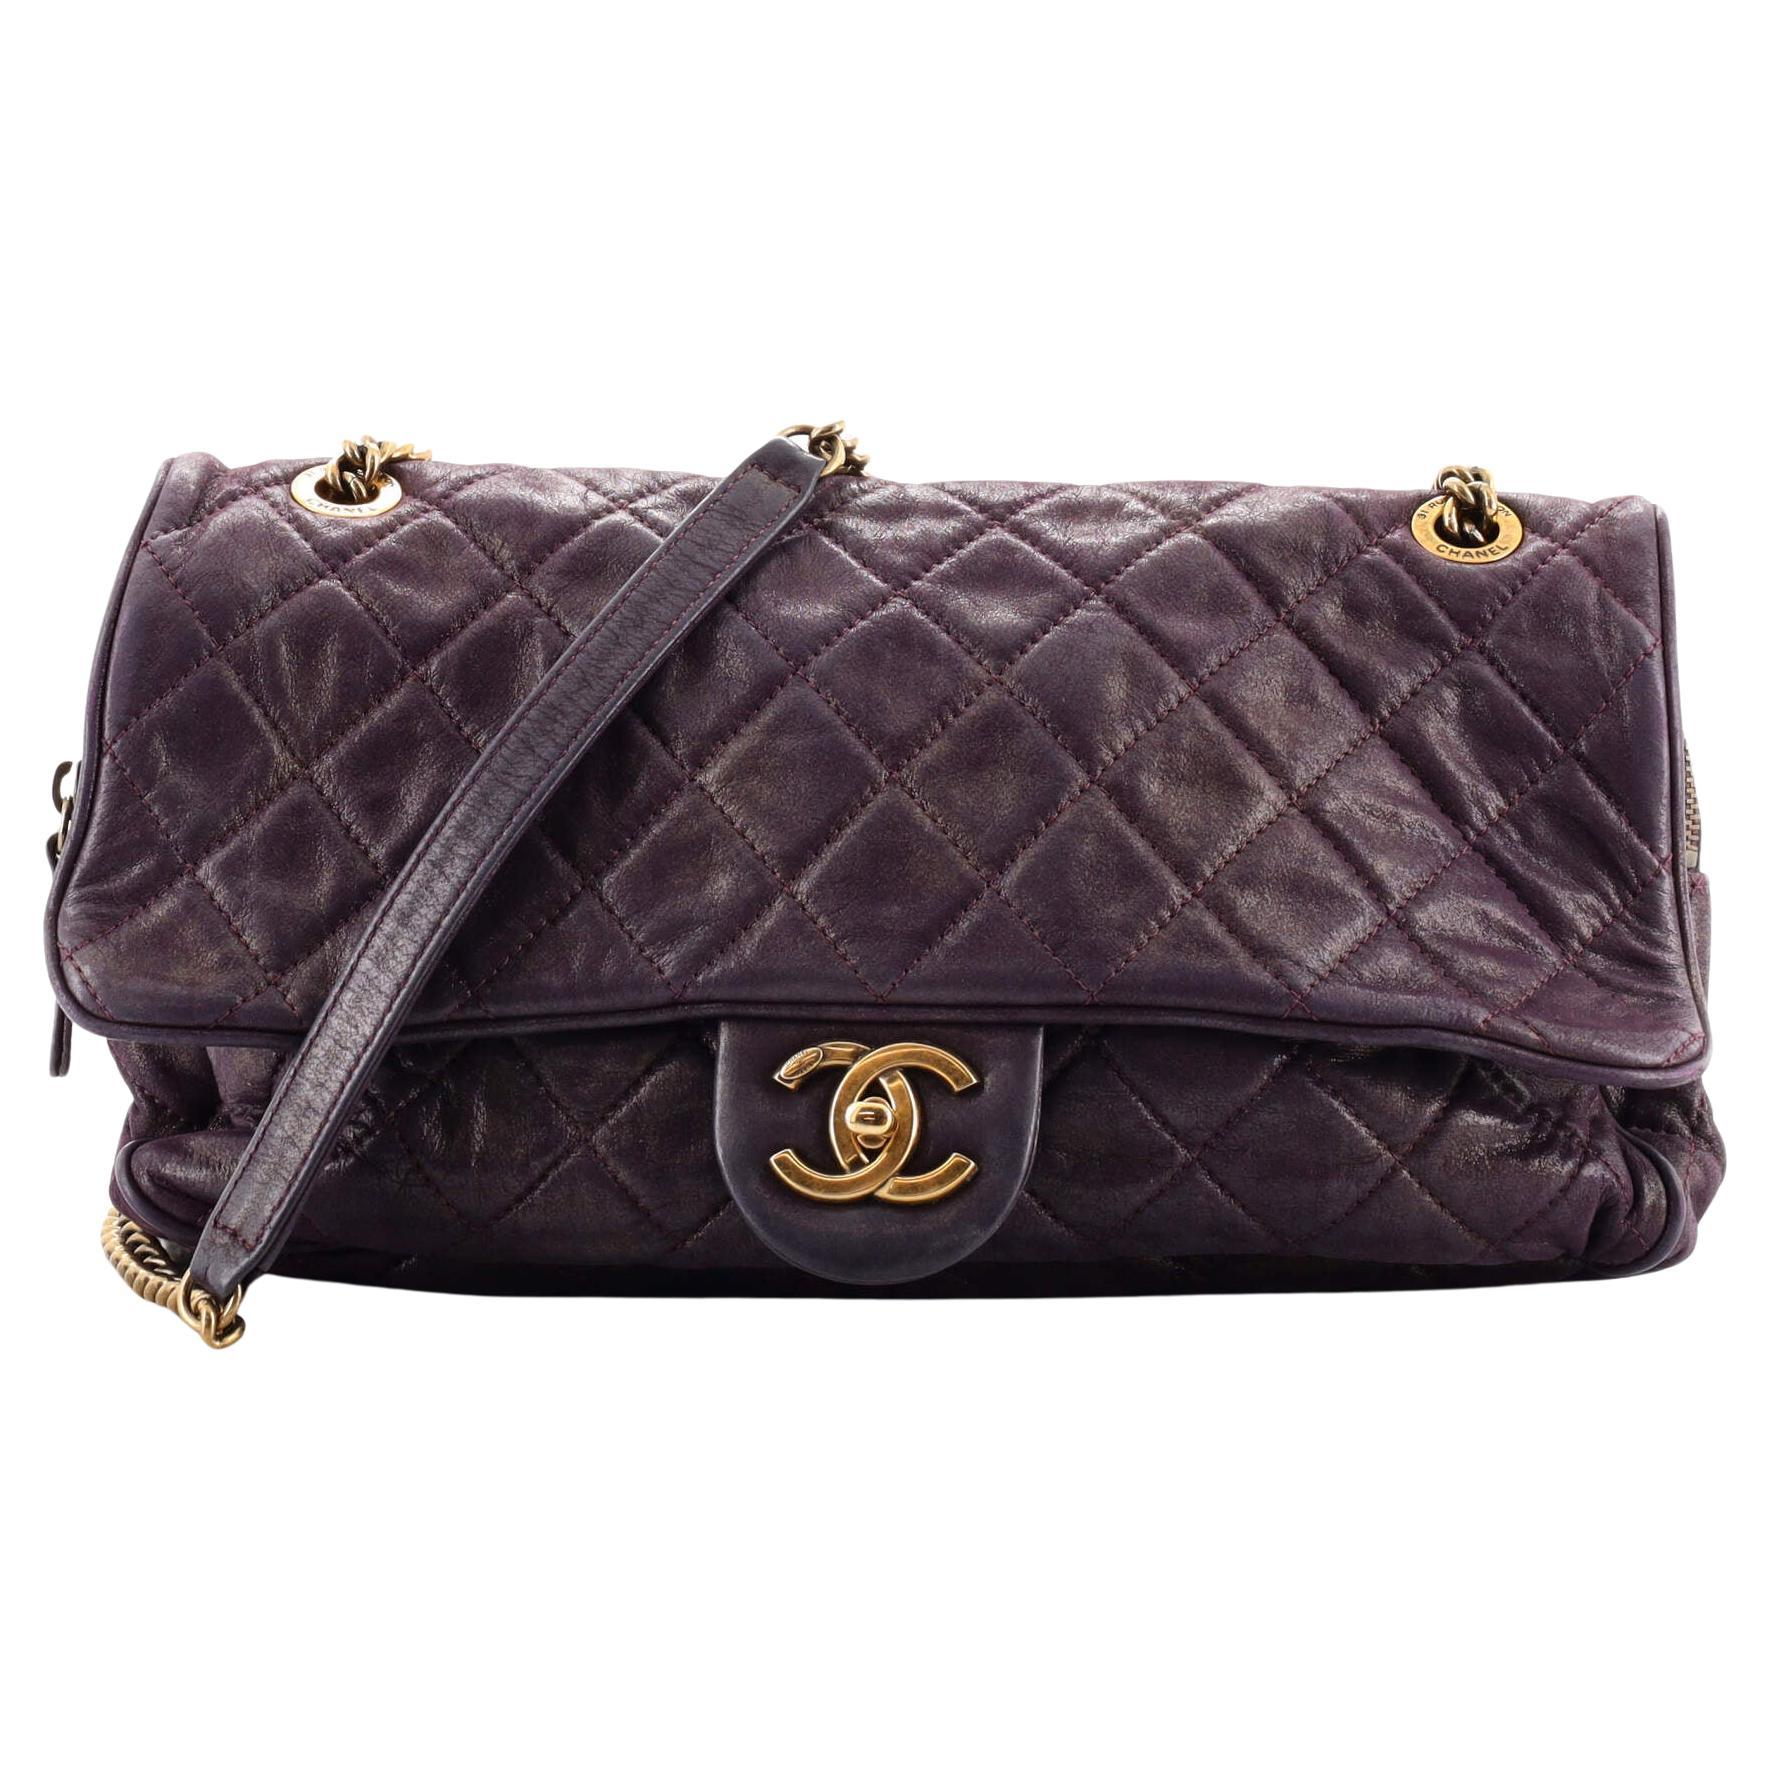 CHANEL Iridescent Calfskin Quilted Small Shiva Flap Black 363293